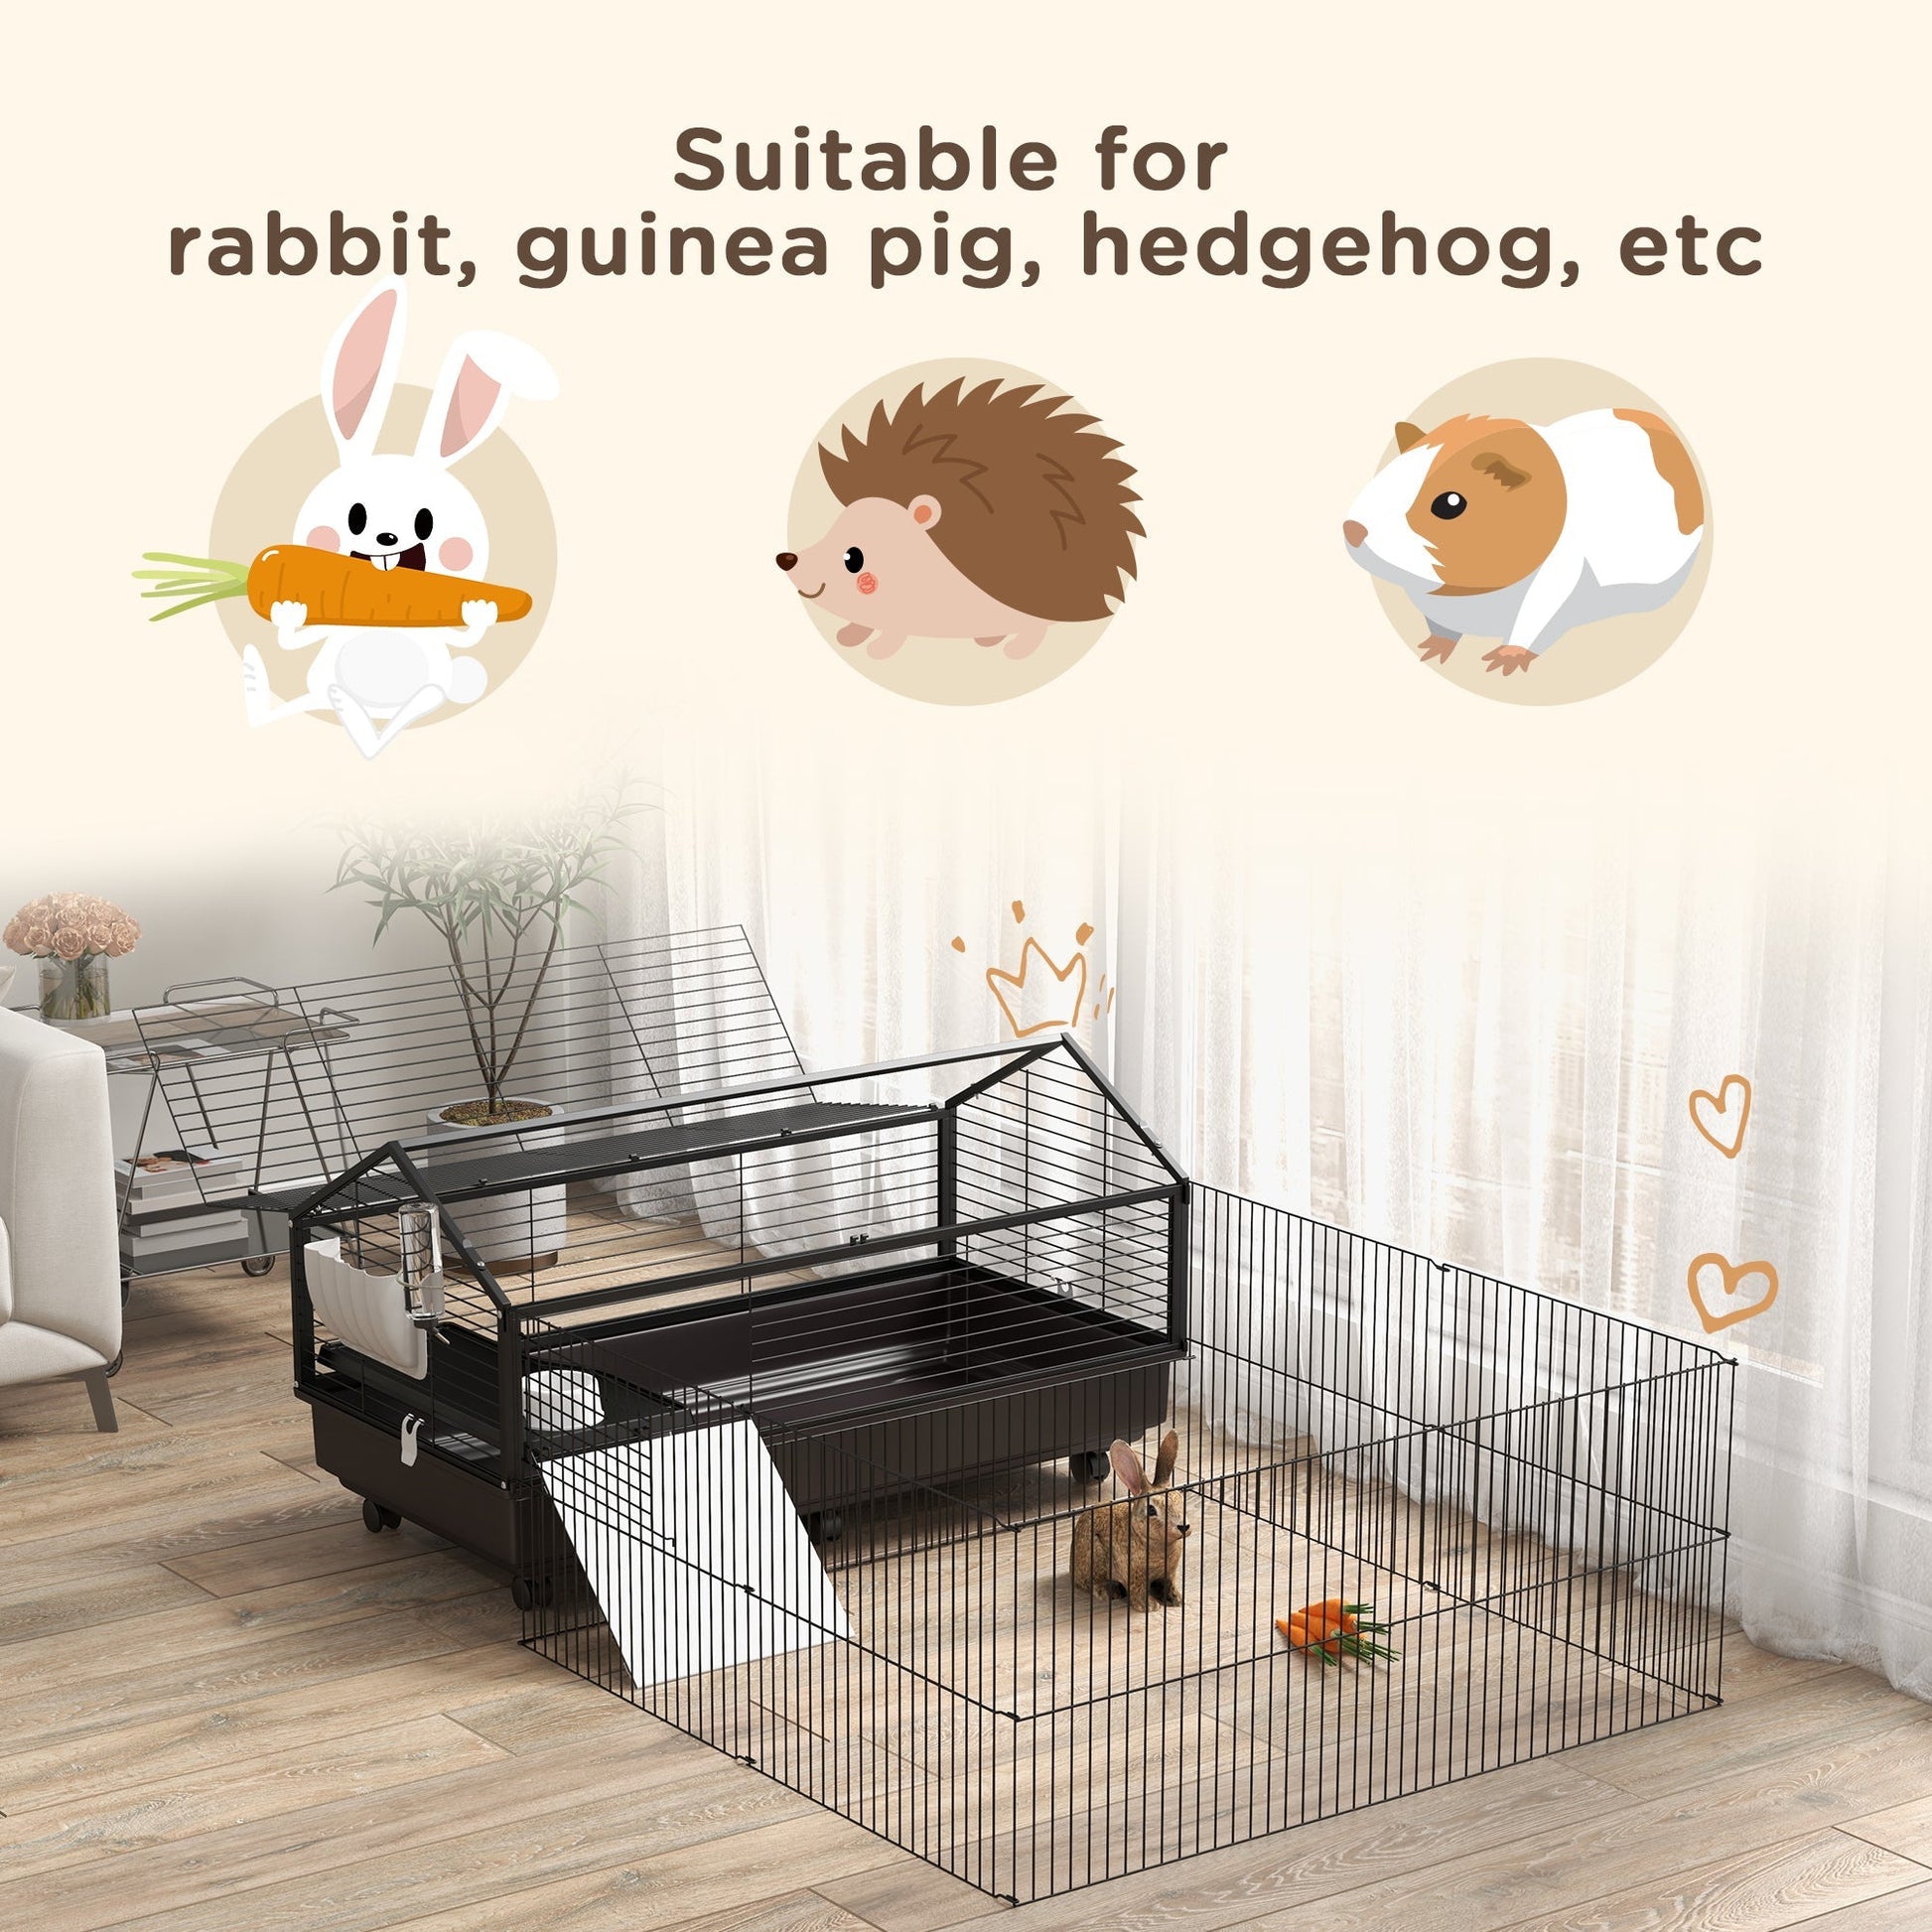 Metal Small Animal Cage, Rabbit Cage for Guinea Pig, Chinchilla, Hedgehog, Bunny with Removable Wheels and Foldable Detachable Run Fence 47.2" L x 66.9" W x 24.4"H at Gallery Canada